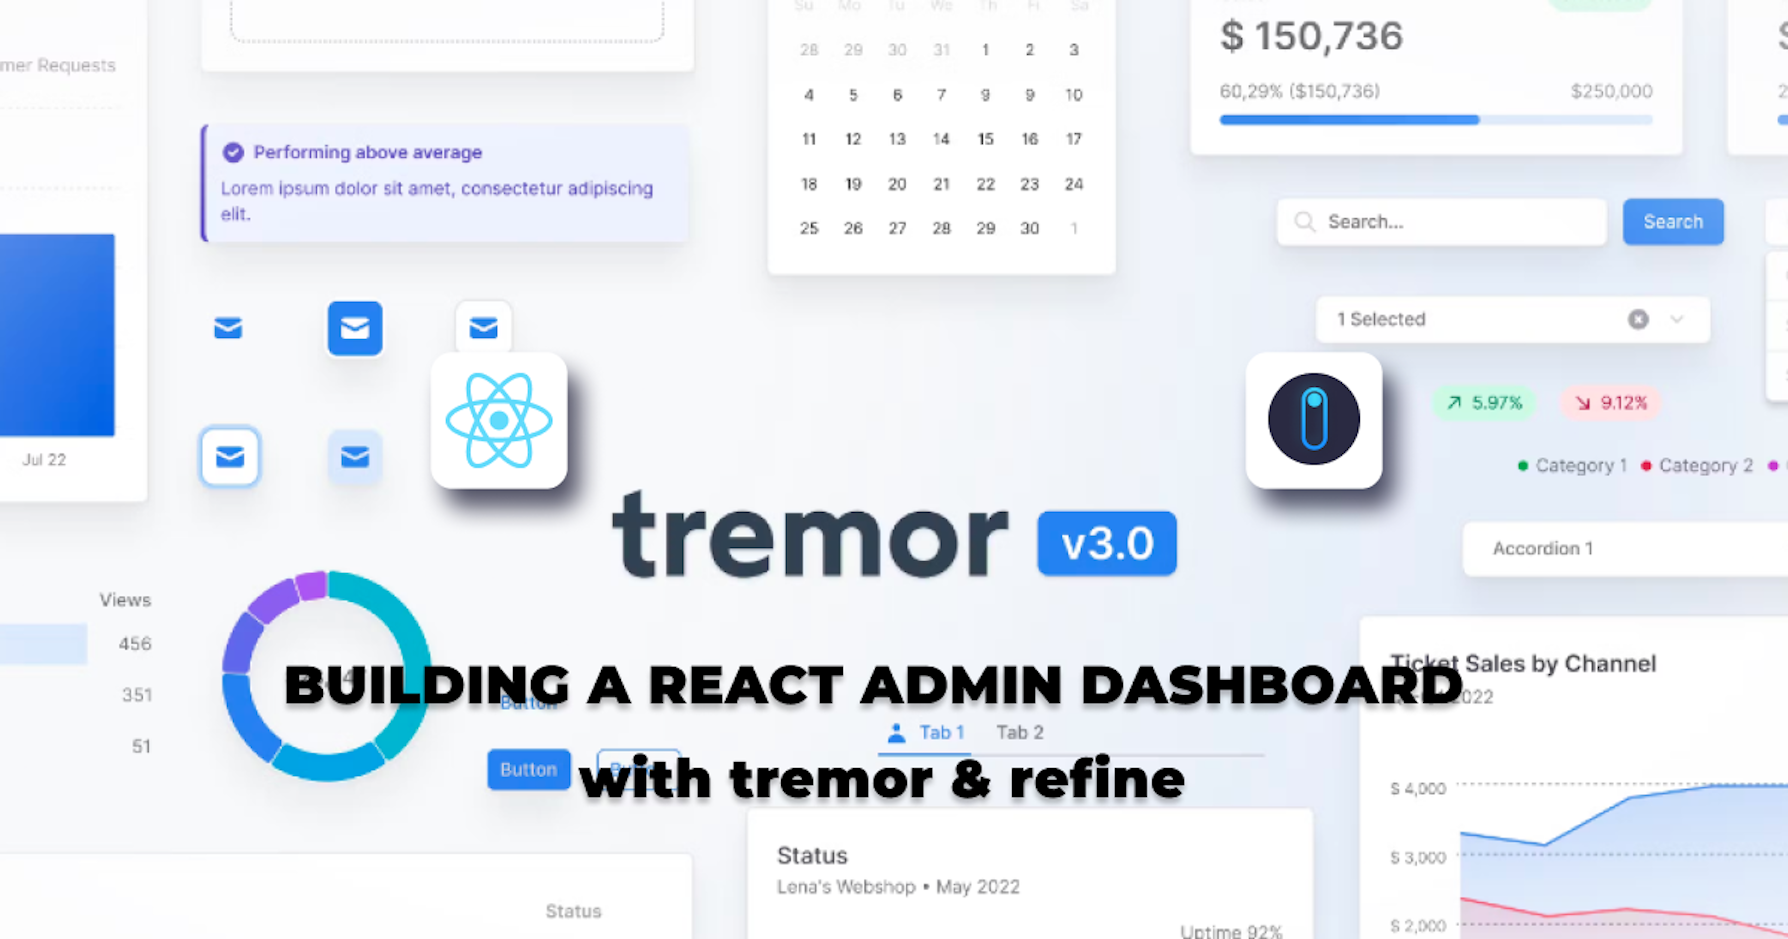 Building a React Admin Dashboard with Tremor Library